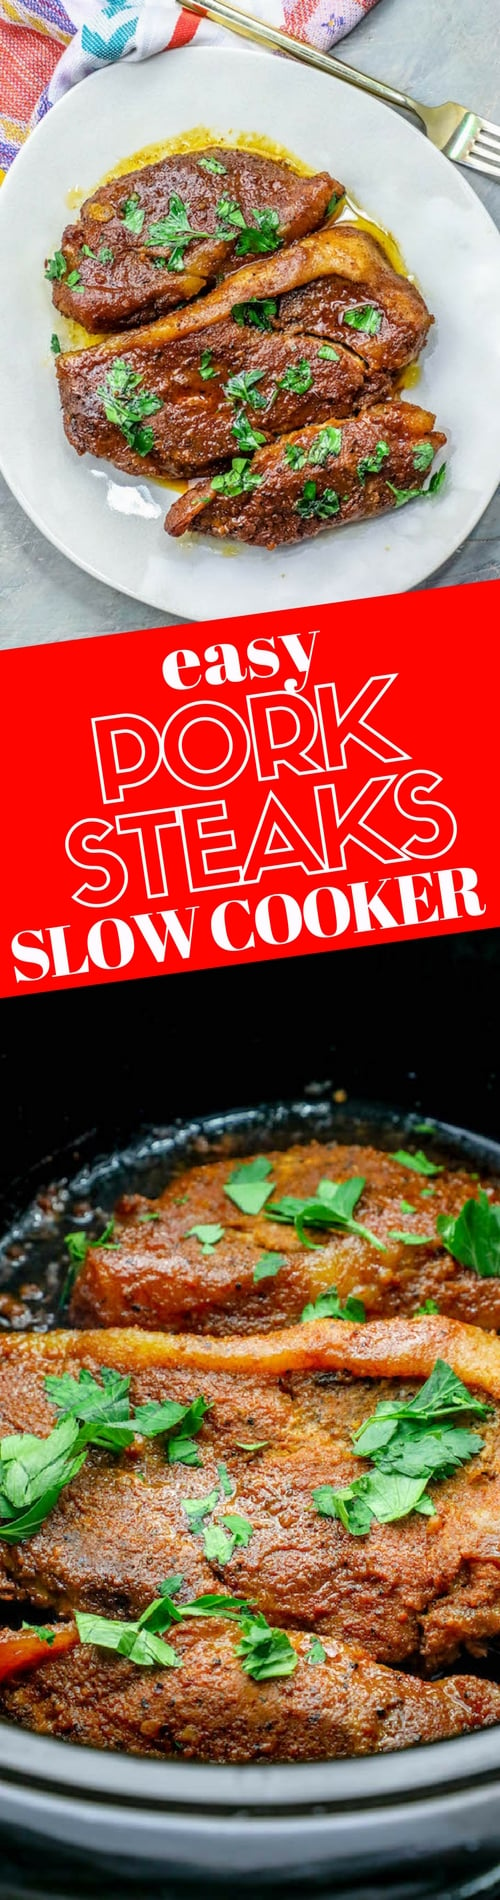 picture of pork steaks on a plate with pork steaks in slow cooker underneath